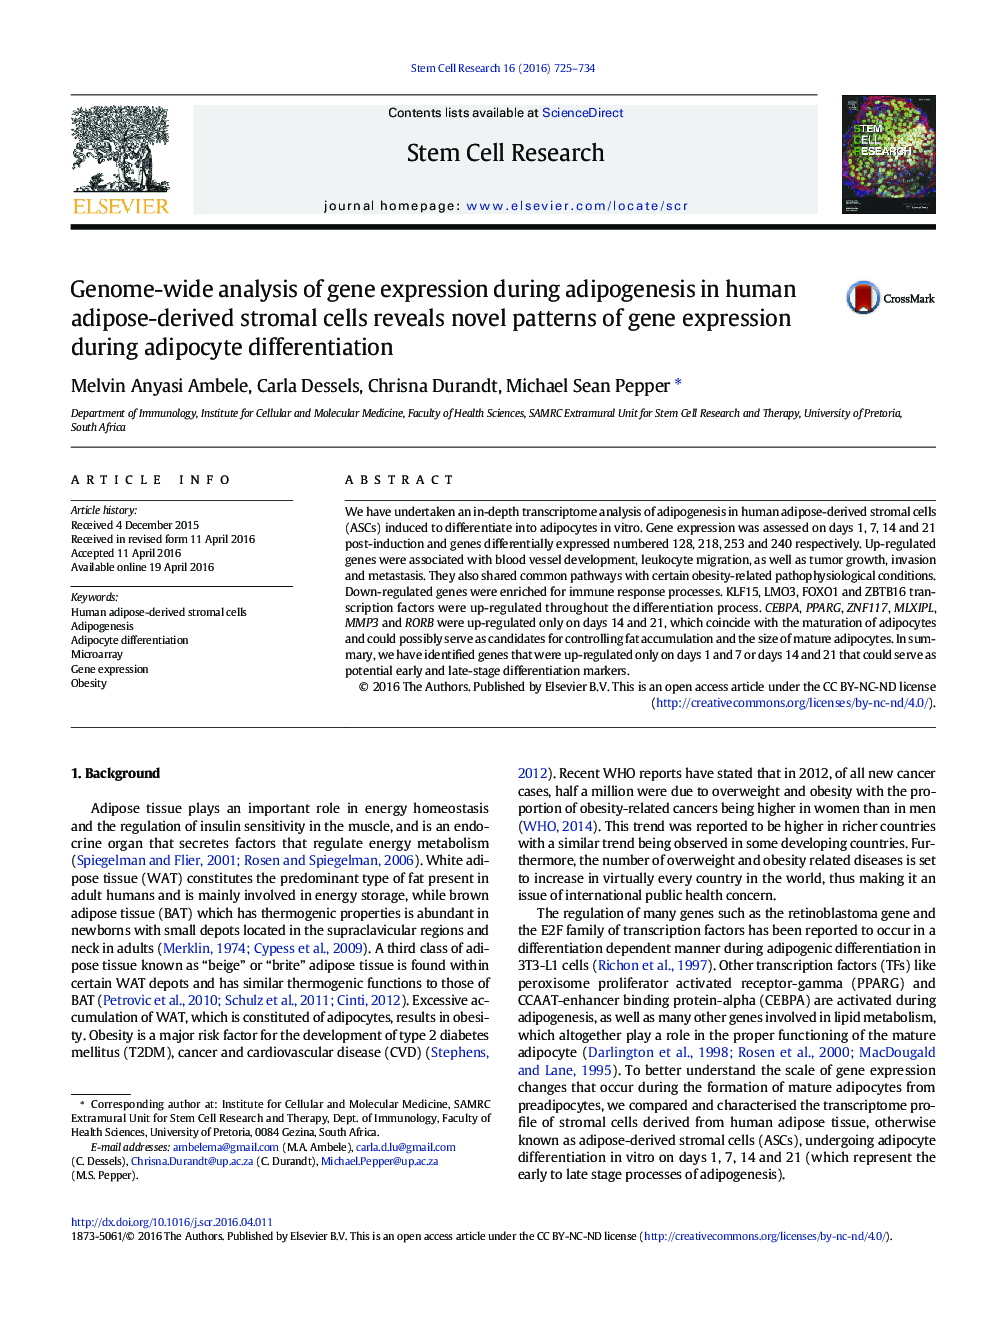 Genome-wide analysis of gene expression during adipogenesis in human adipose-derived stromal cells reveals novel patterns of gene expression during adipocyte differentiation